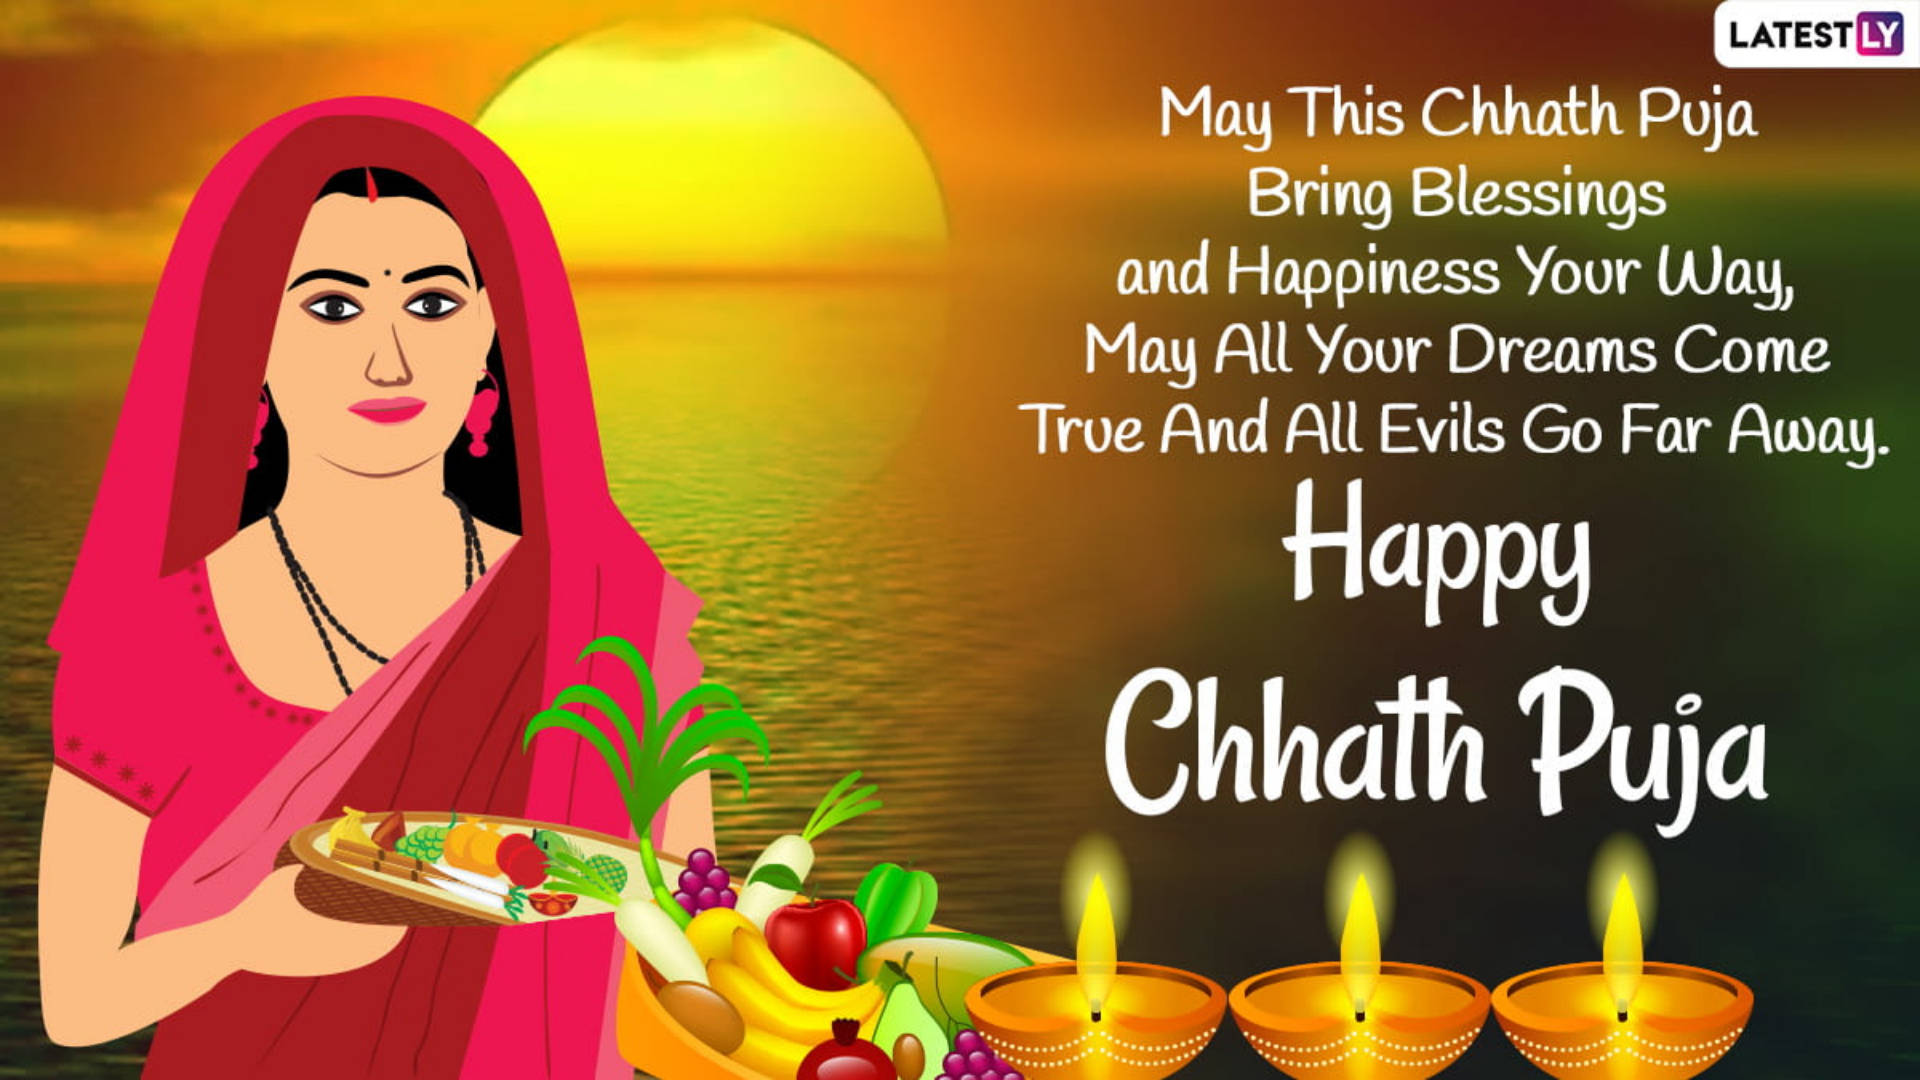 Woman In Red Saree Chhath Puja Wallpaper